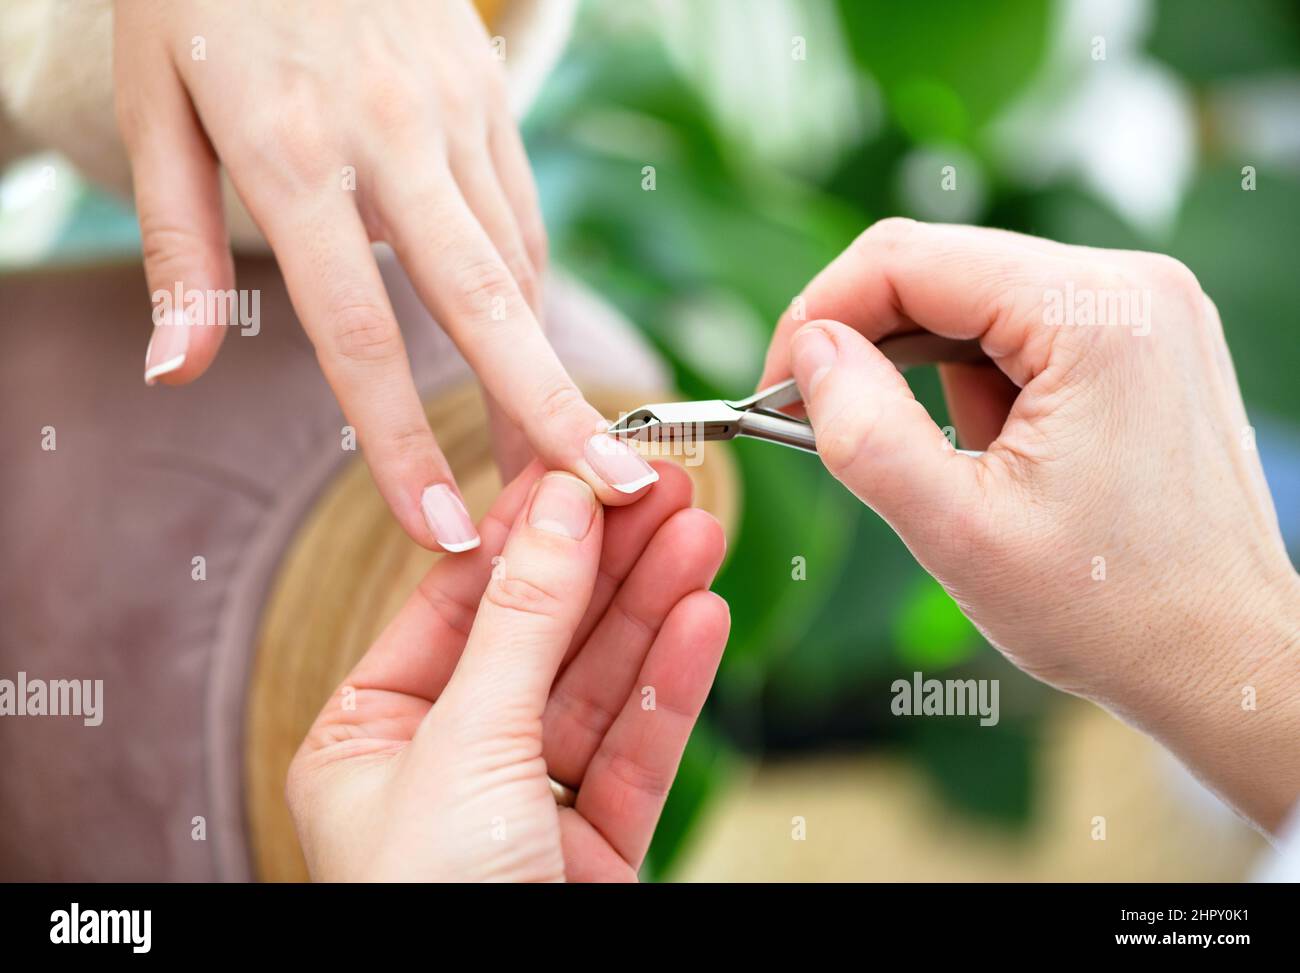 Crop anonymous manicurist using nippers while cutting cuticles on nails of unrecognizable female client during manicure procedure on blurred backgroun Stock Photo